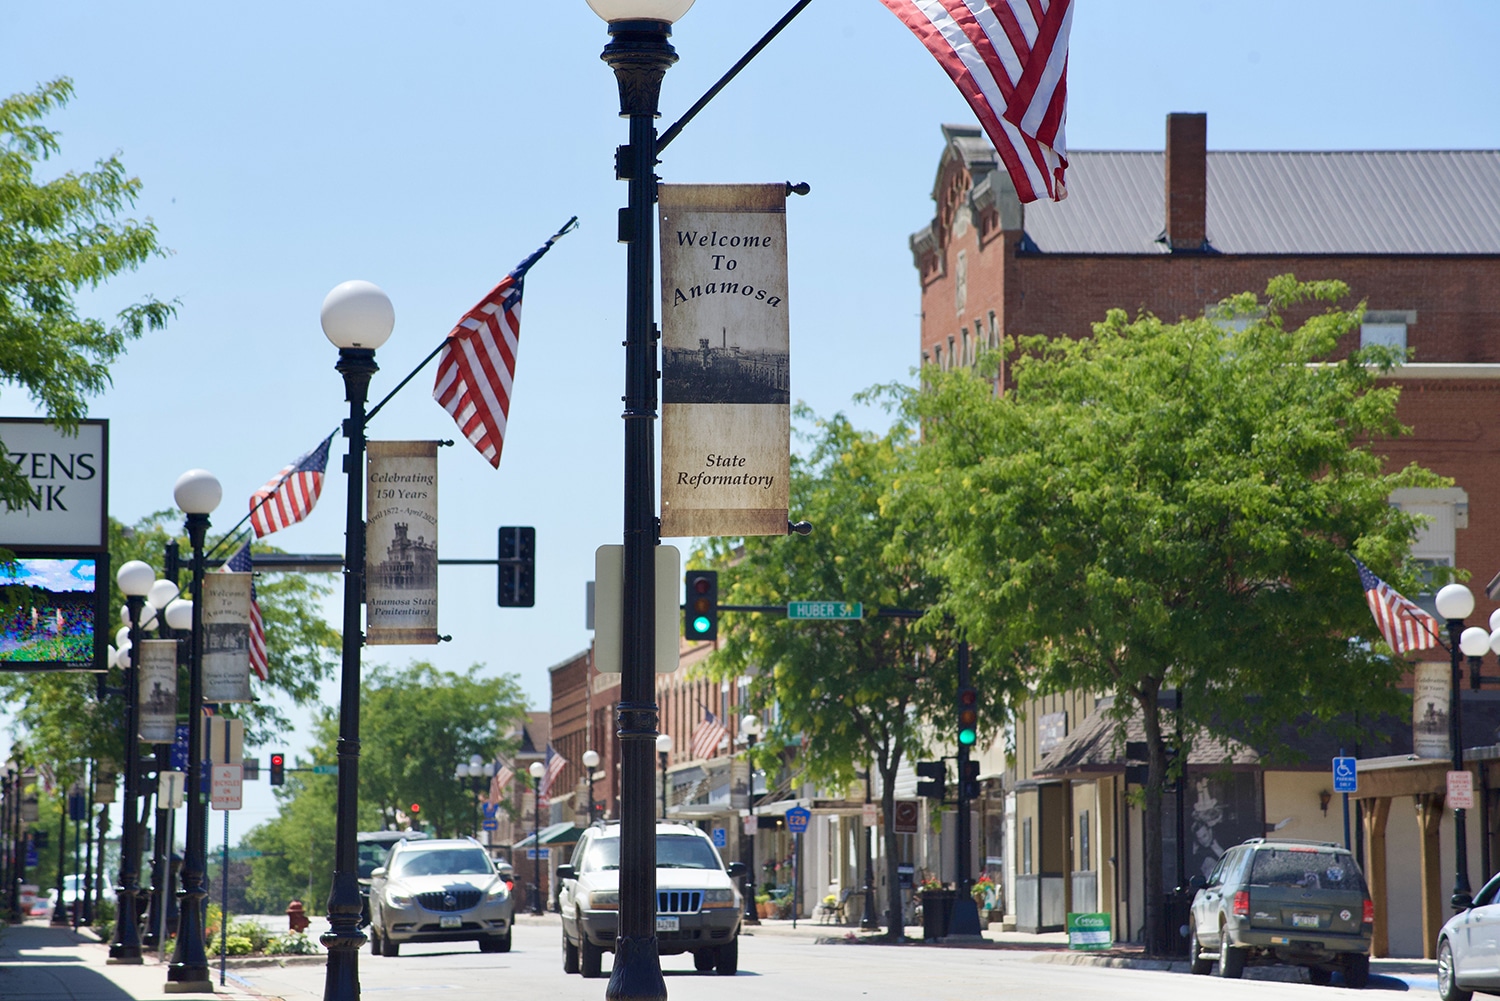 A smalltown street with lightposts festooned with American flags.